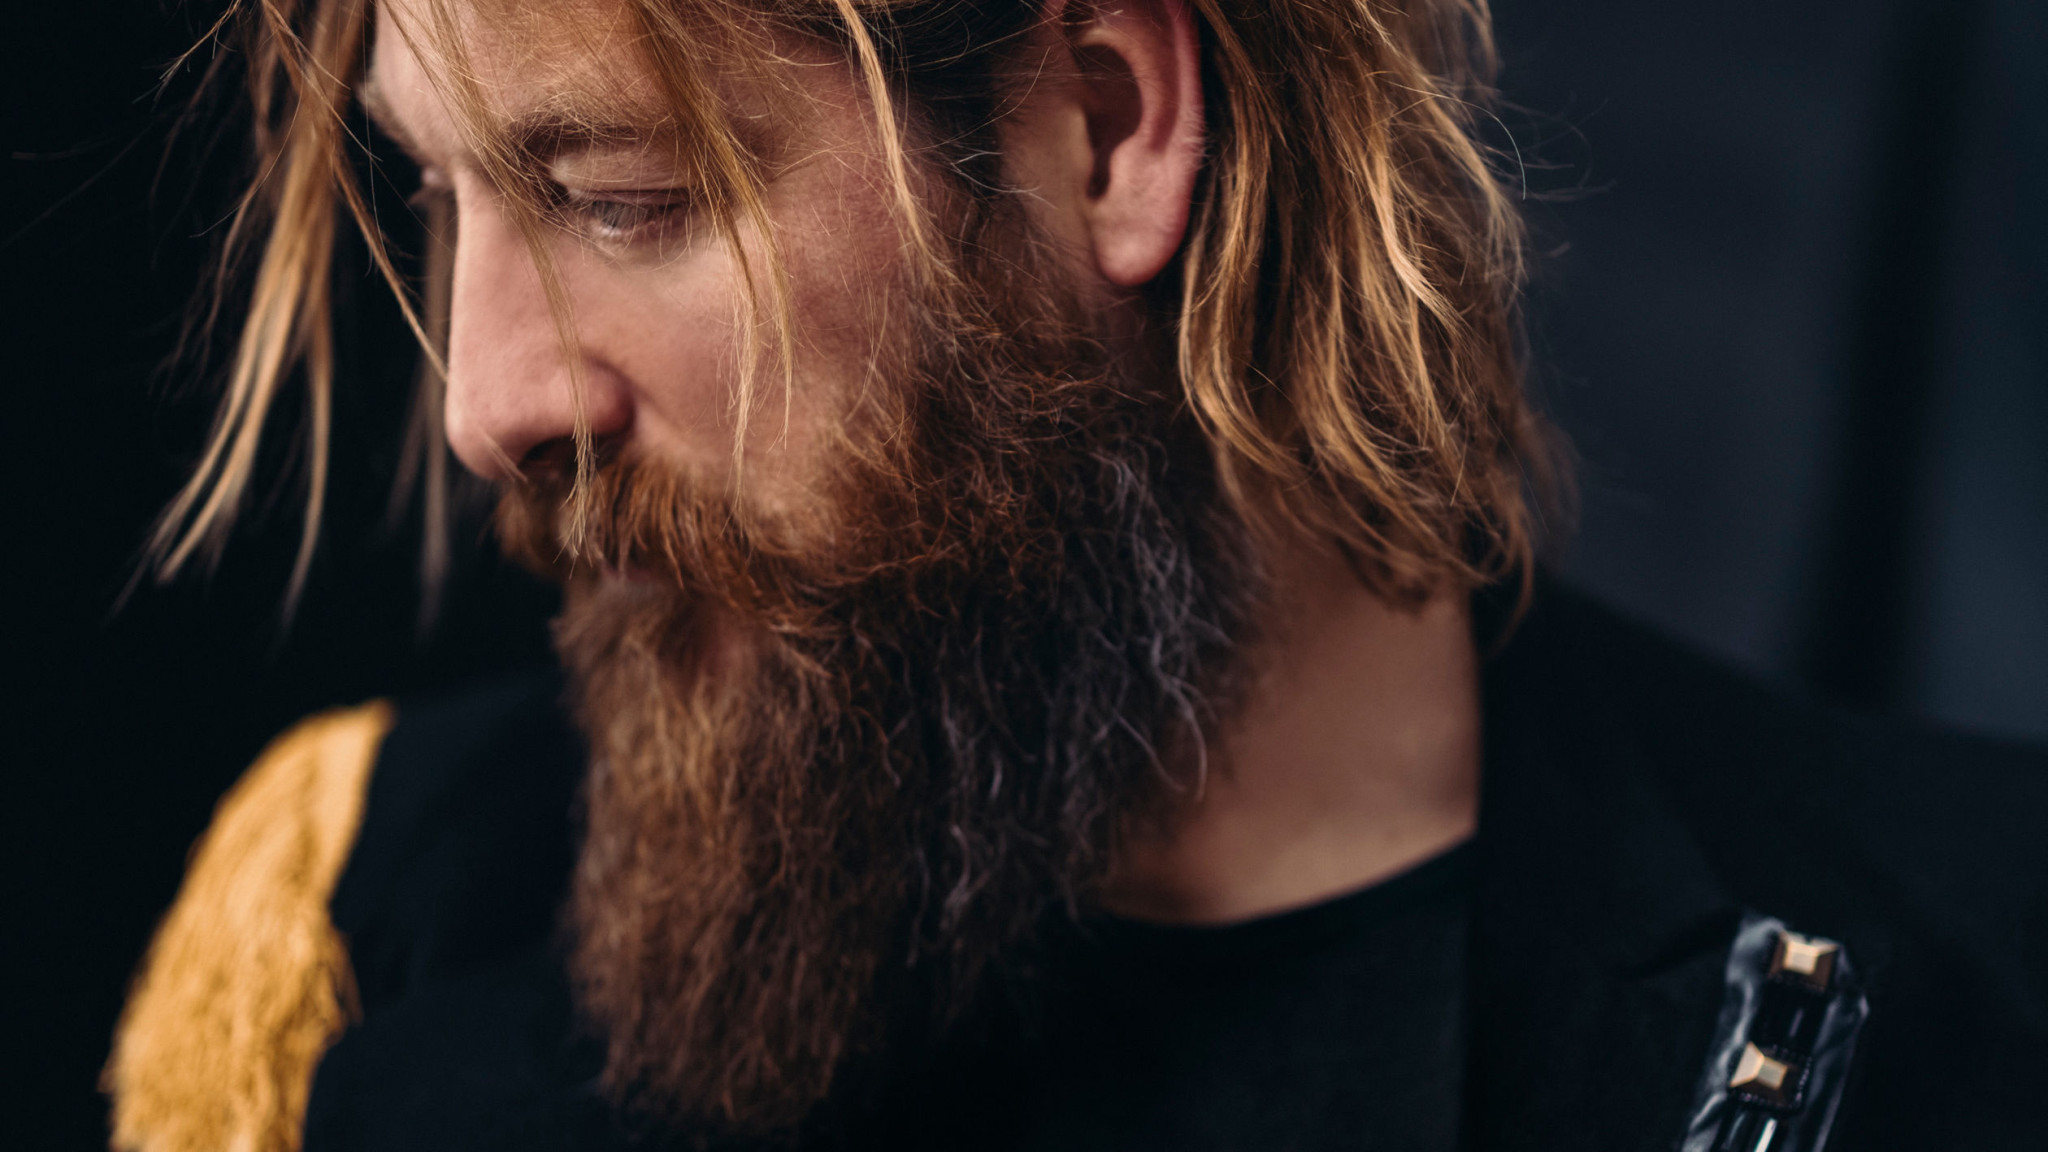 Joep Beving: The London Session - Songs with Words